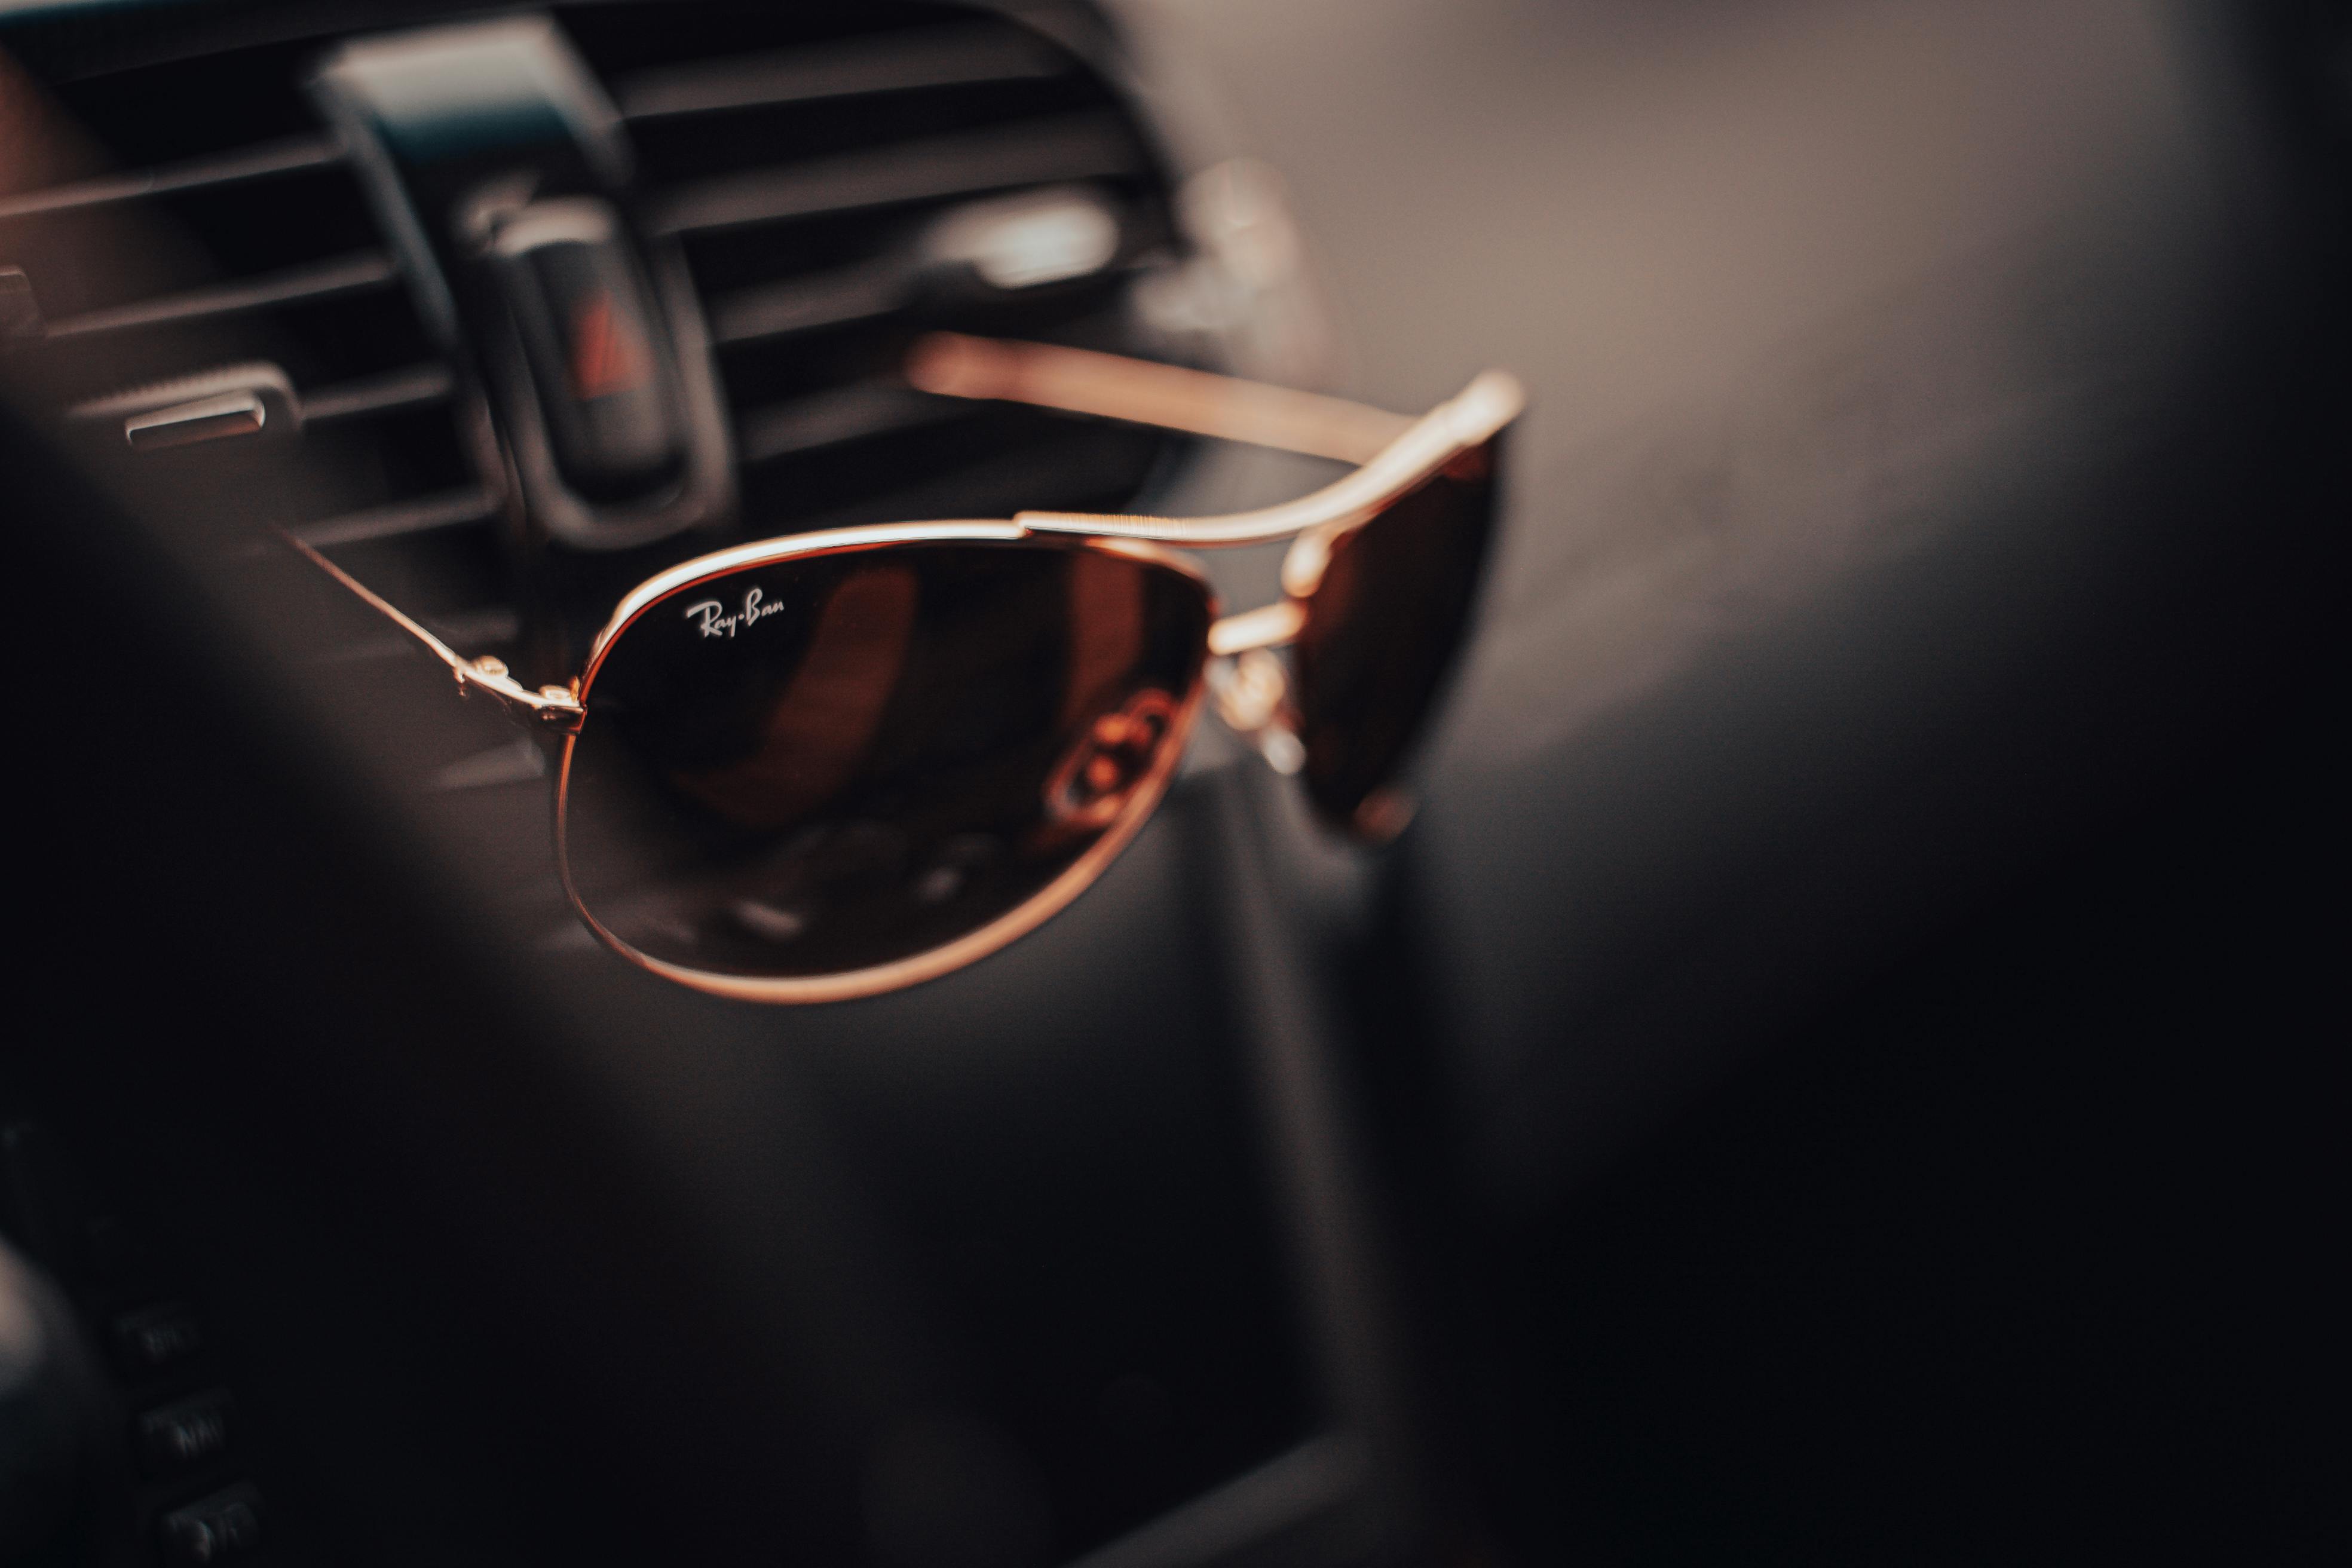 Ray Ban Photos, Download The BEST Free Ray Ban Stock Photos & HD Images